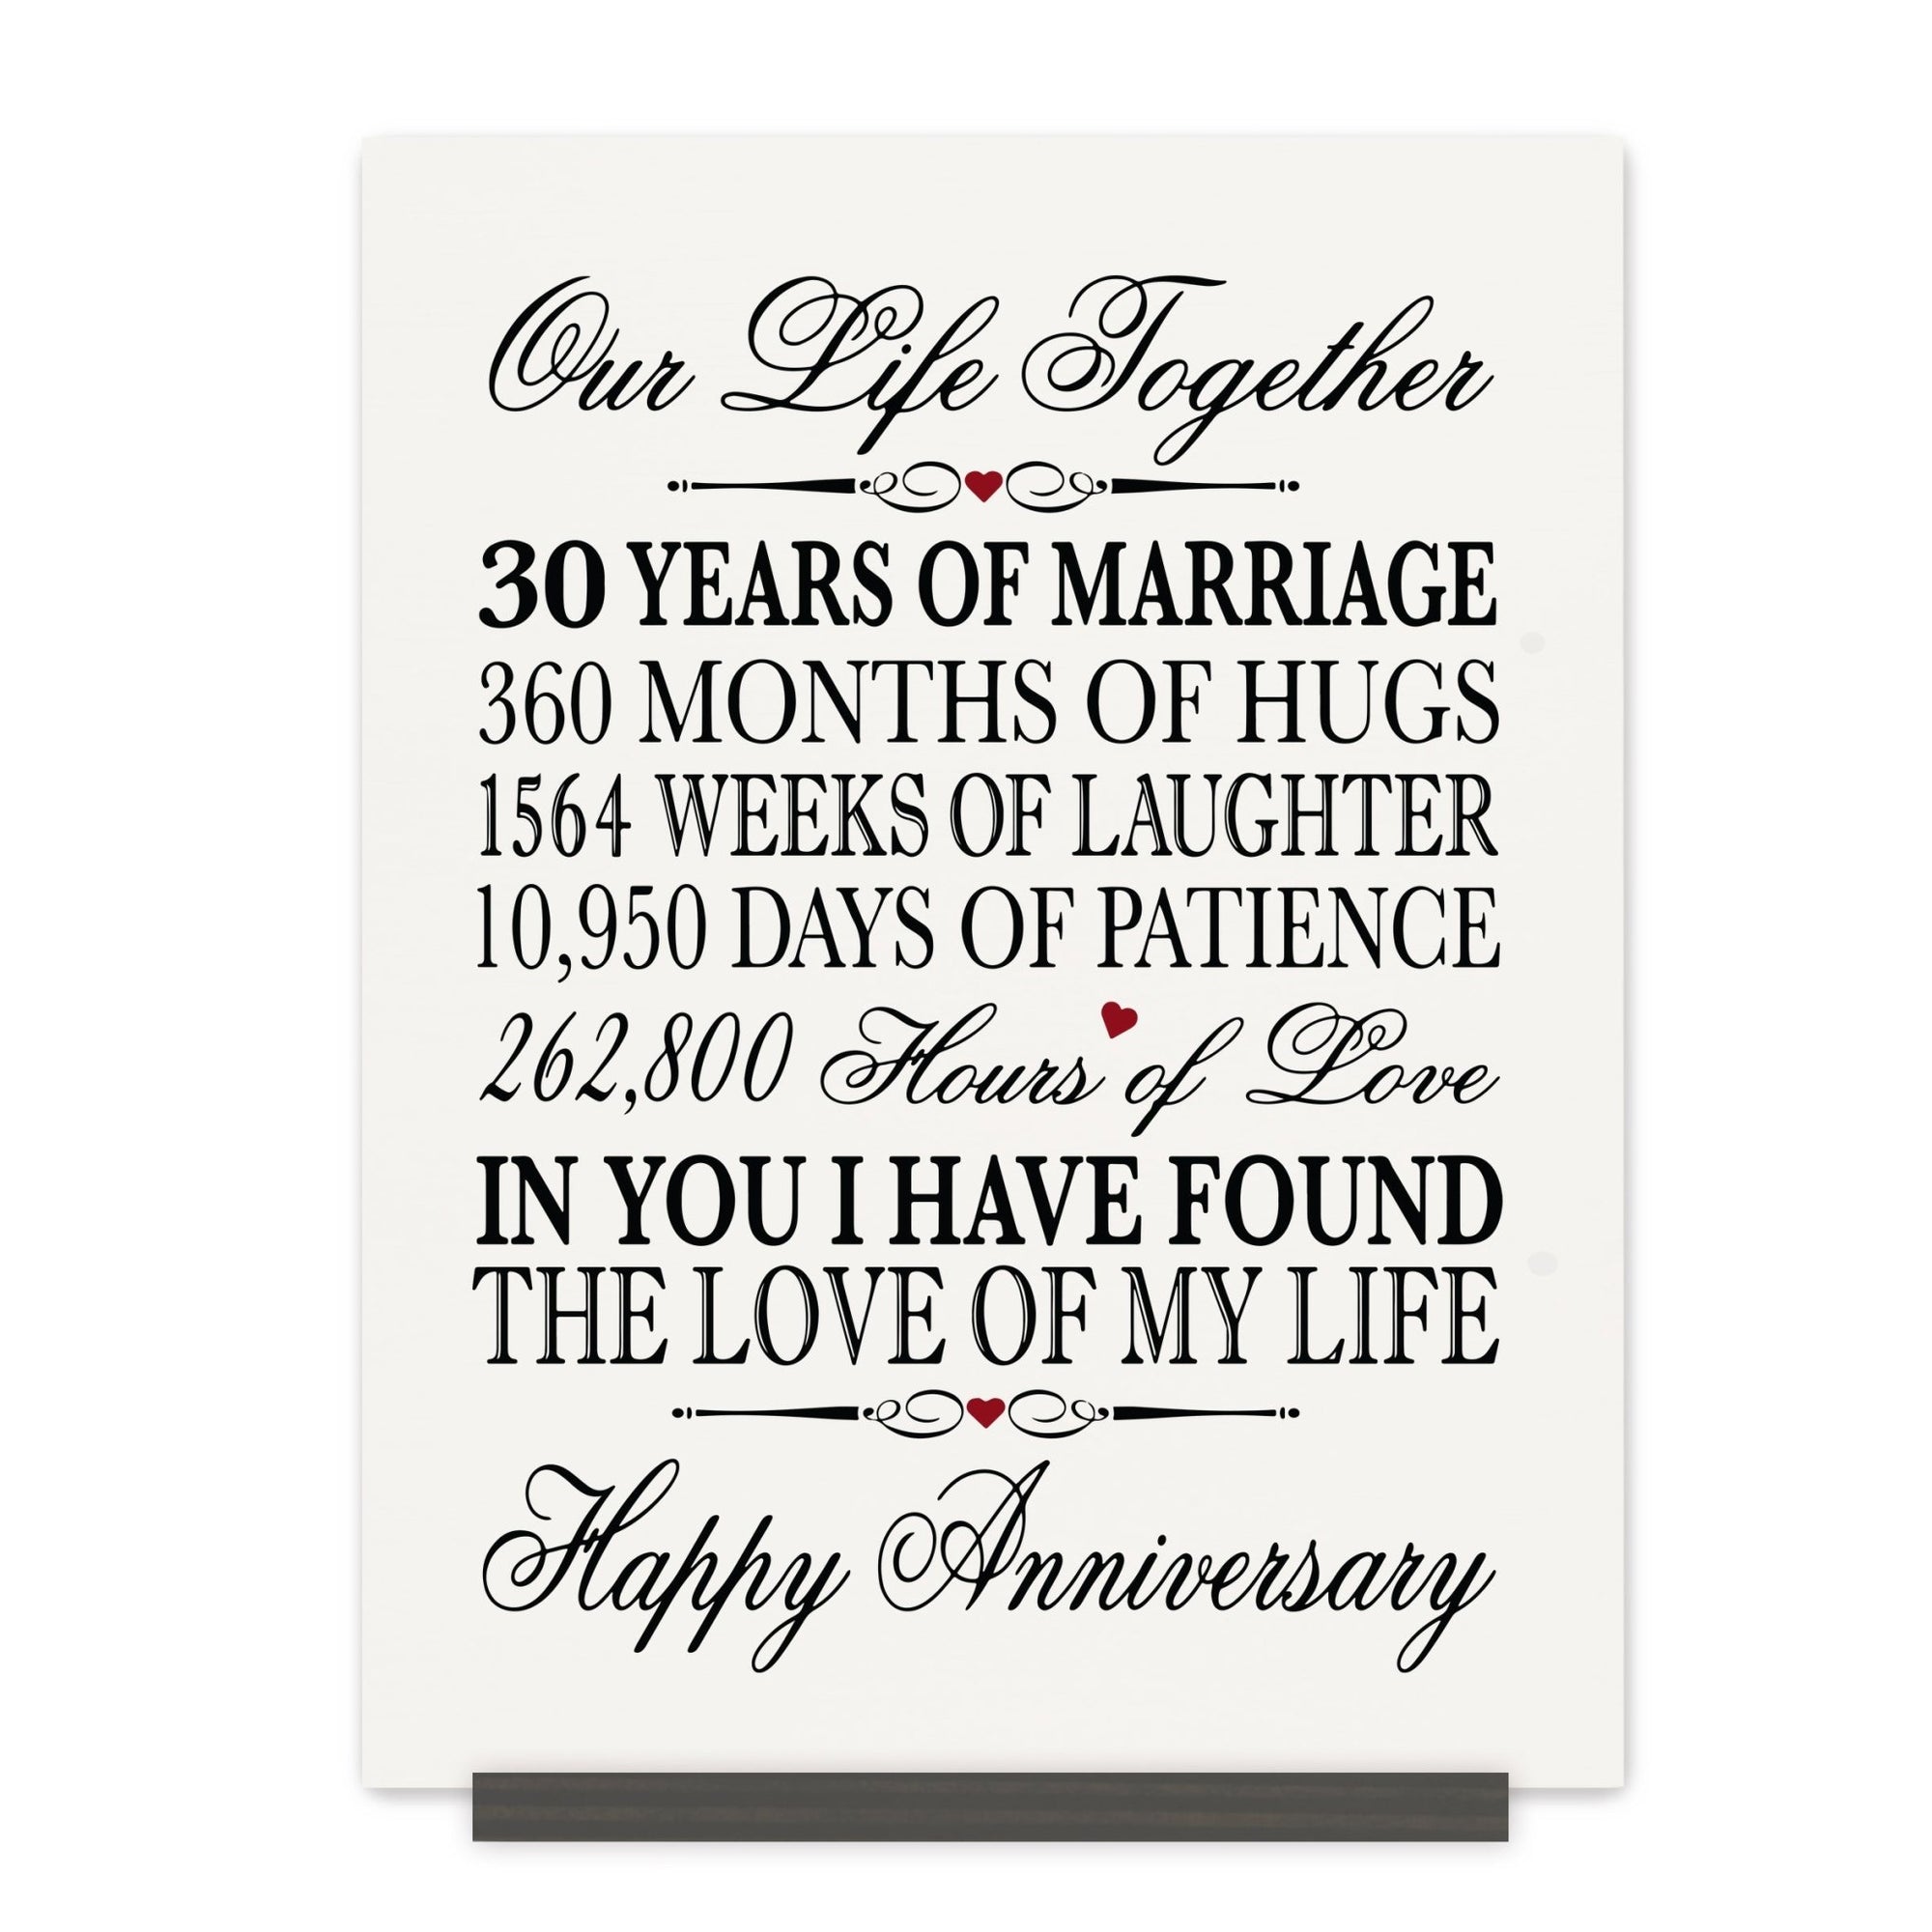 30th Wedding Anniversary Wall Plaque - Our Life Together - LifeSong Milestones